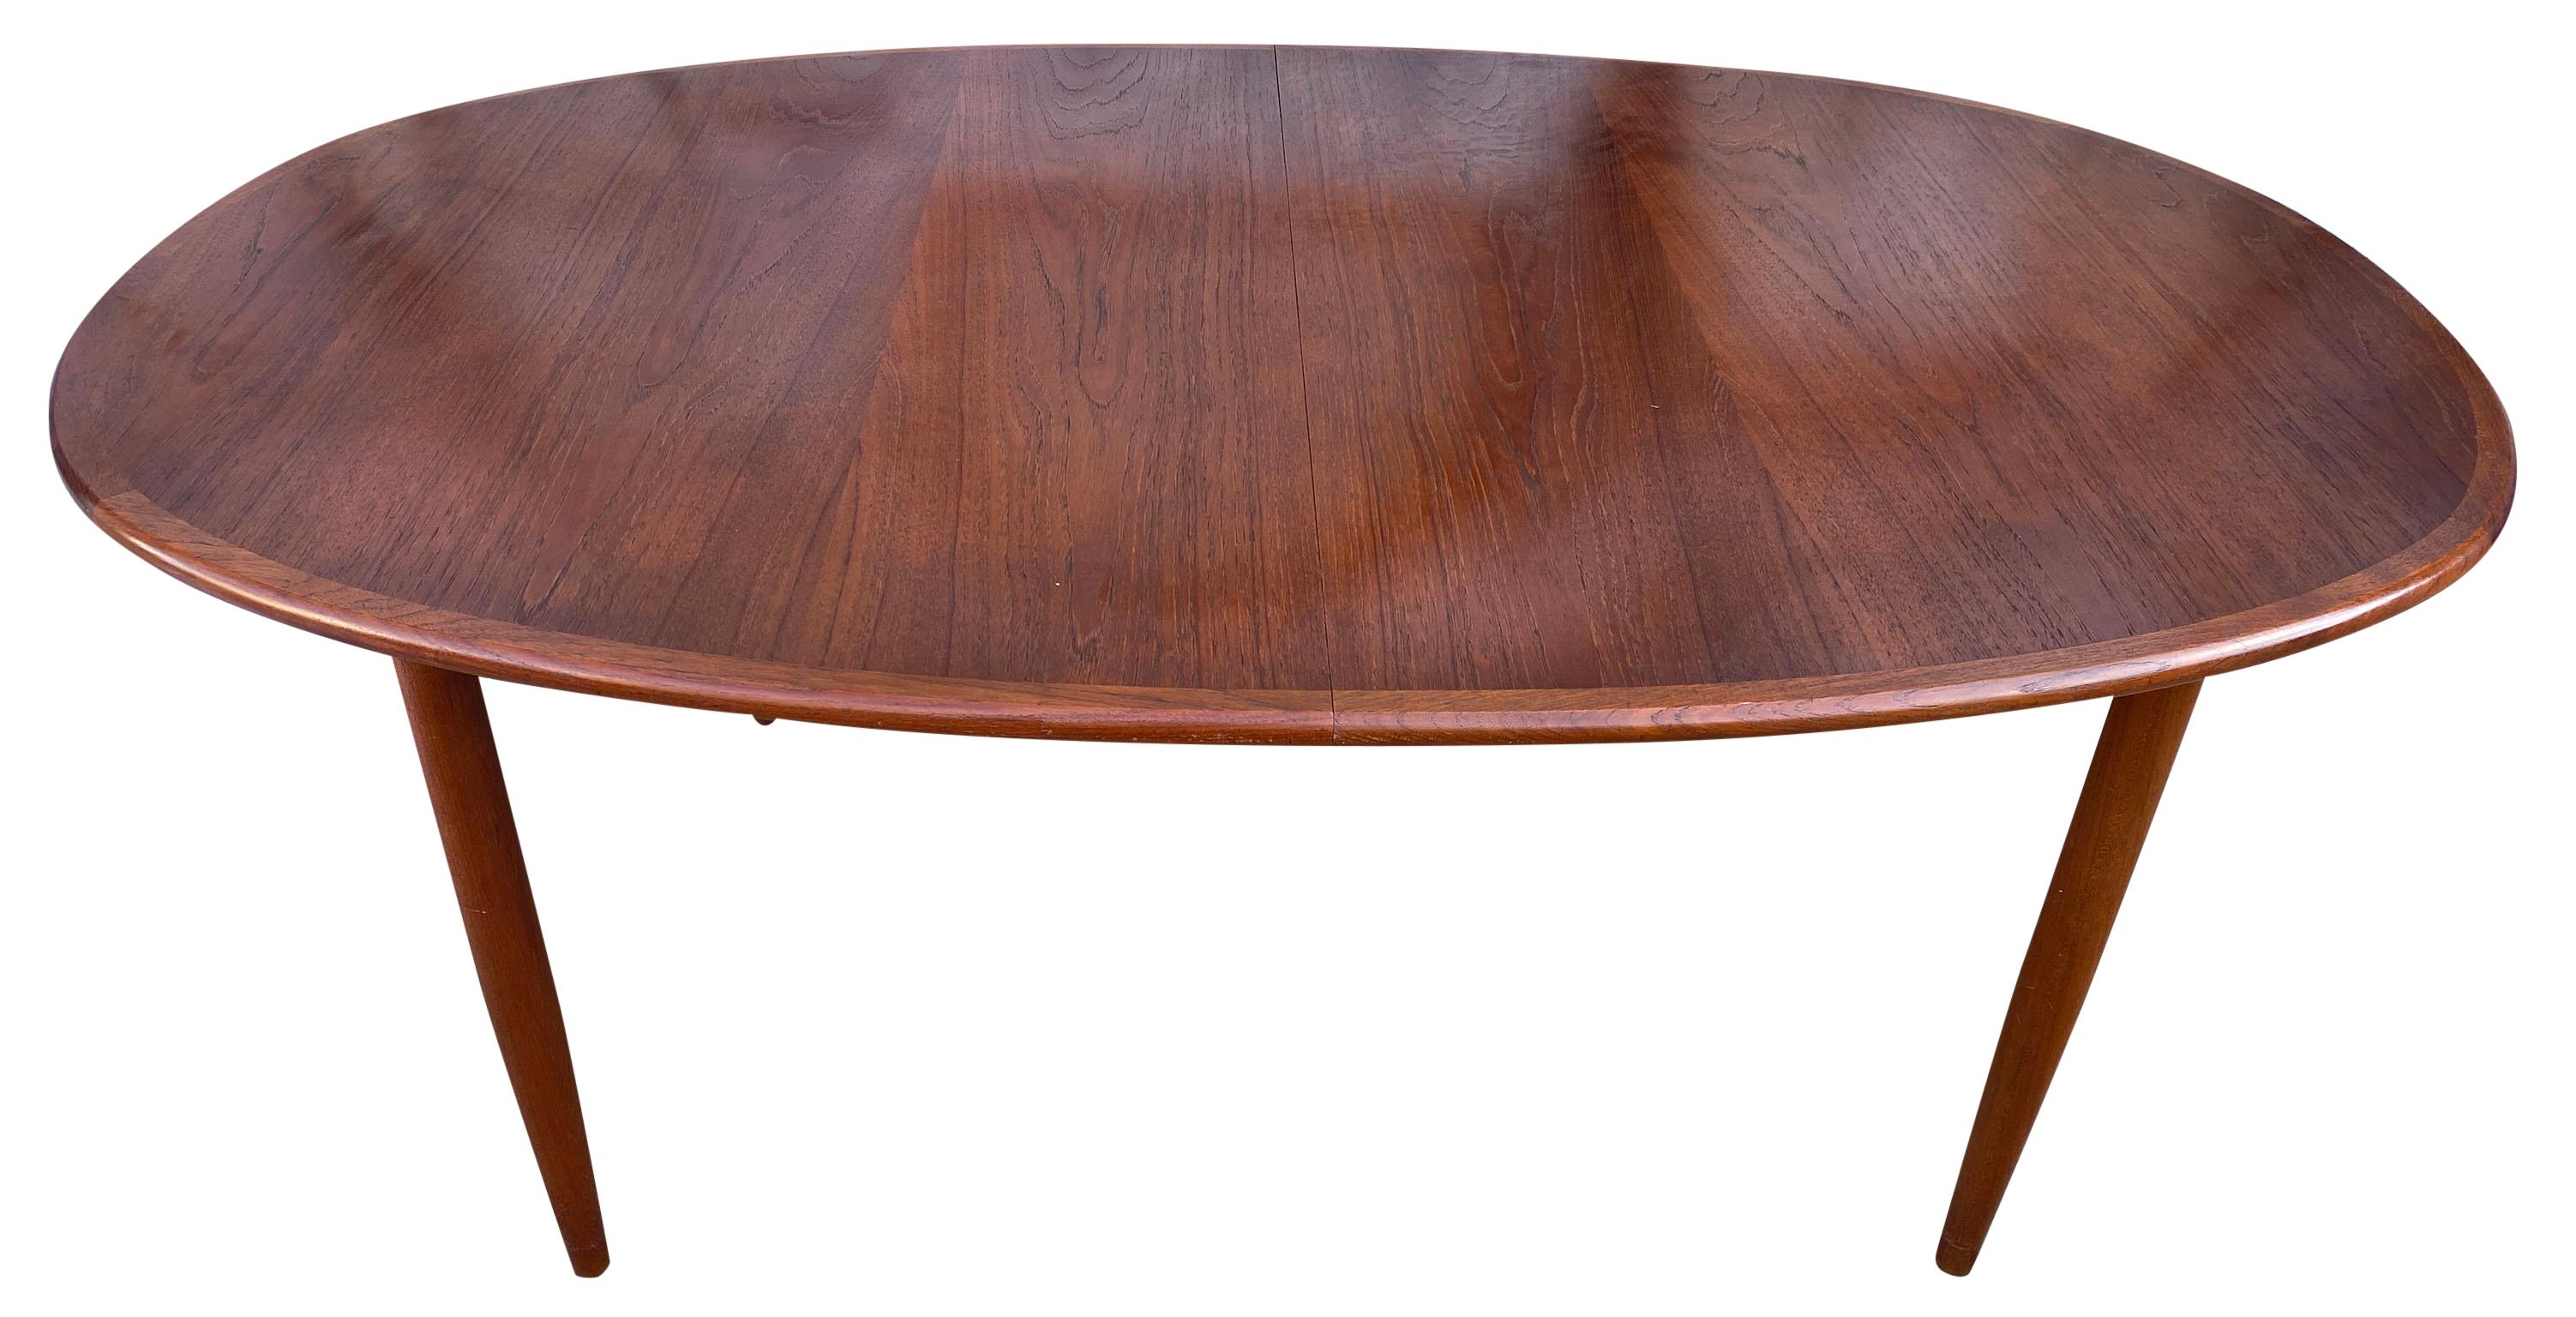 Midcentury teak elliptical oval Danish extension dining table with (3) leaves. This table is very high quality hand built in Denmark. Solid teak legs with 4 leg base. This table is in great vintage condition, the (3) leaves look rarely used and are